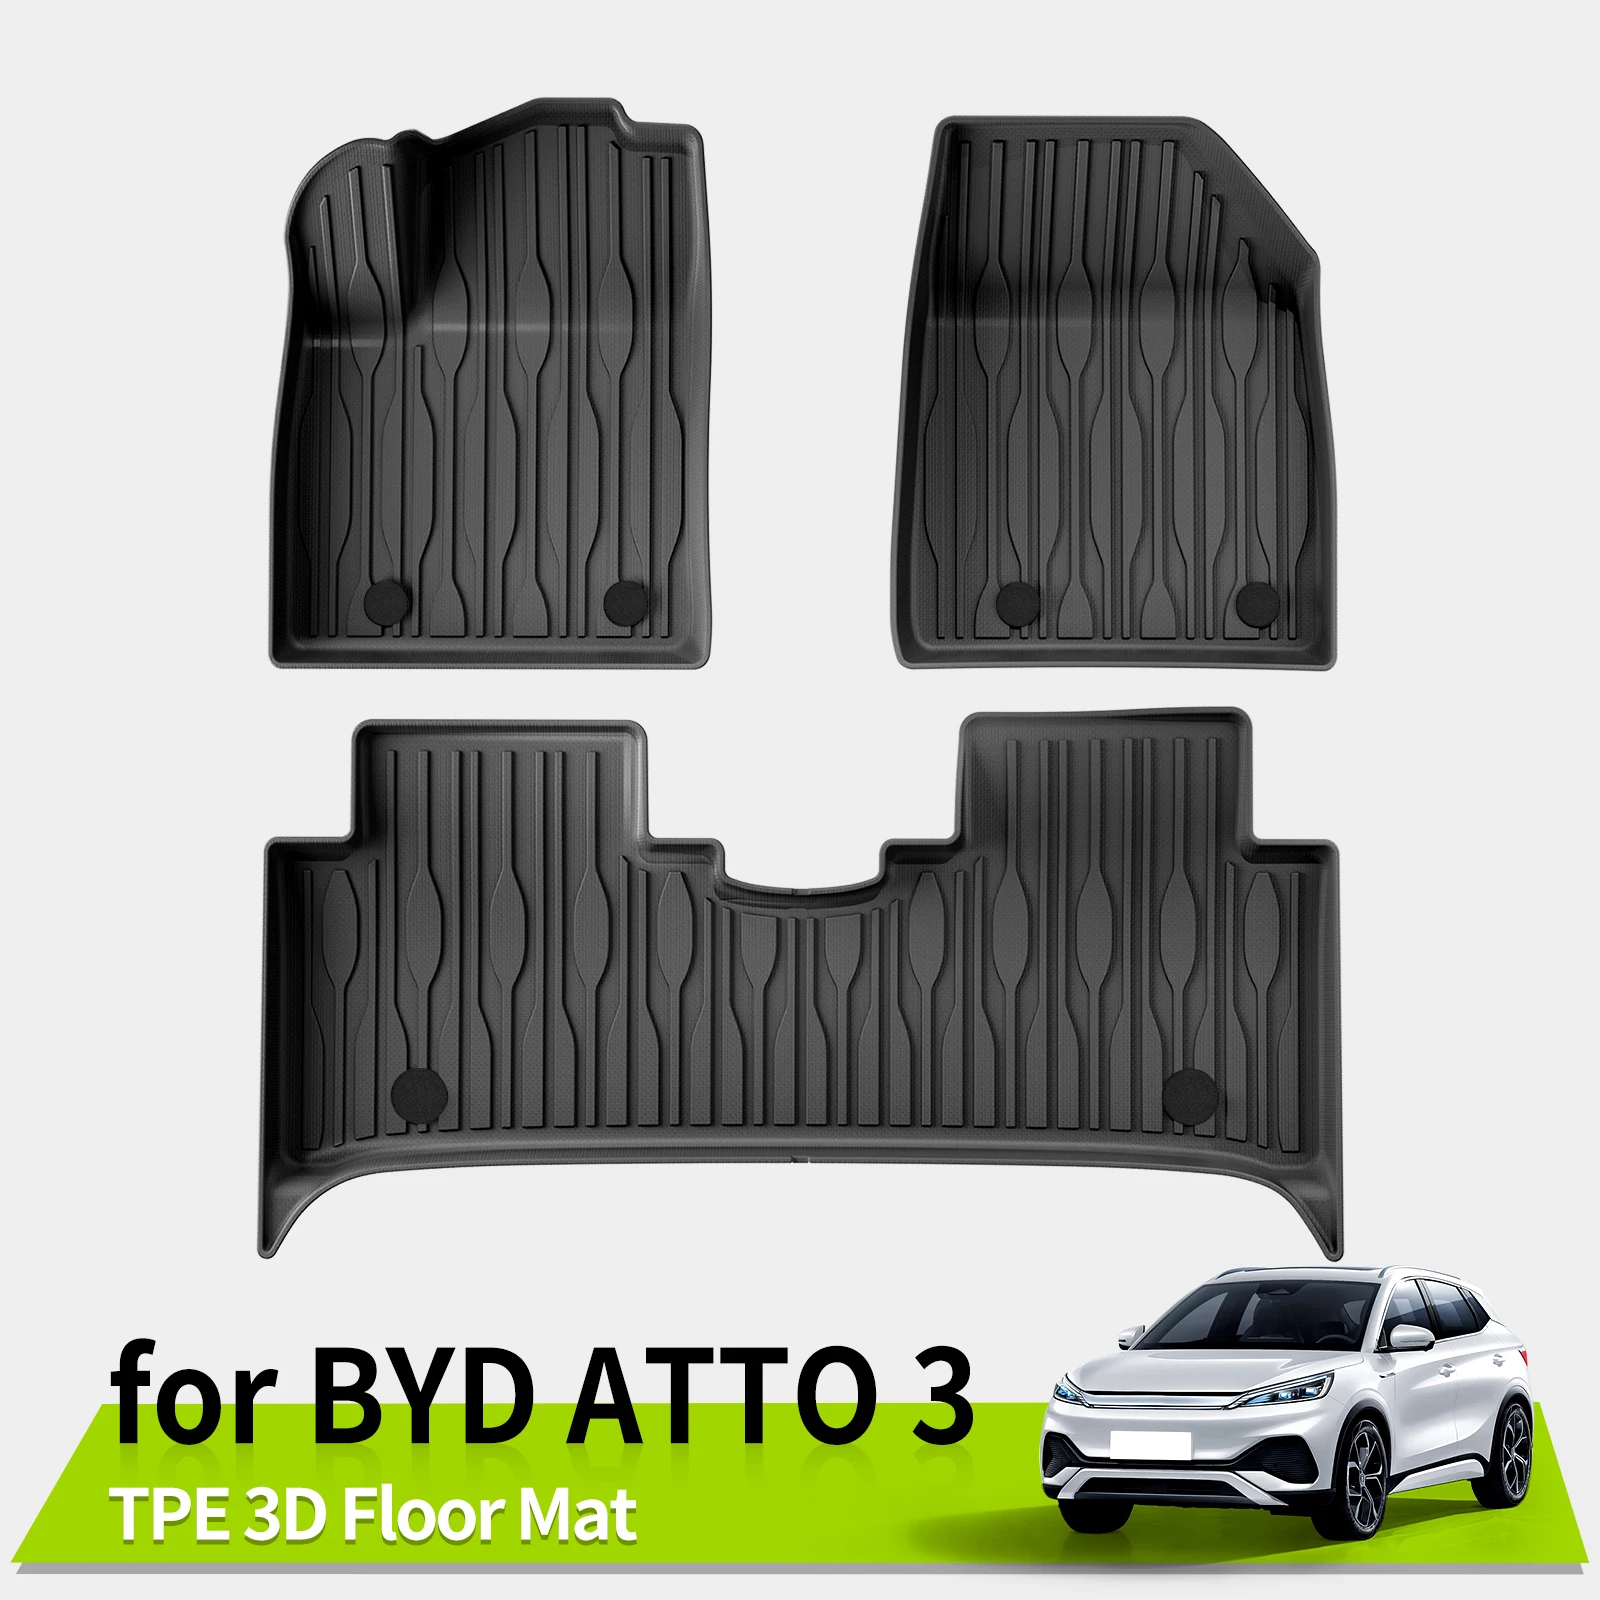 

3D Floor Mats for BYD ATTO 3 Yuan Plus All-Weather Anti-Slip Waterproof Pads Accessories TPE Left Hand Driving